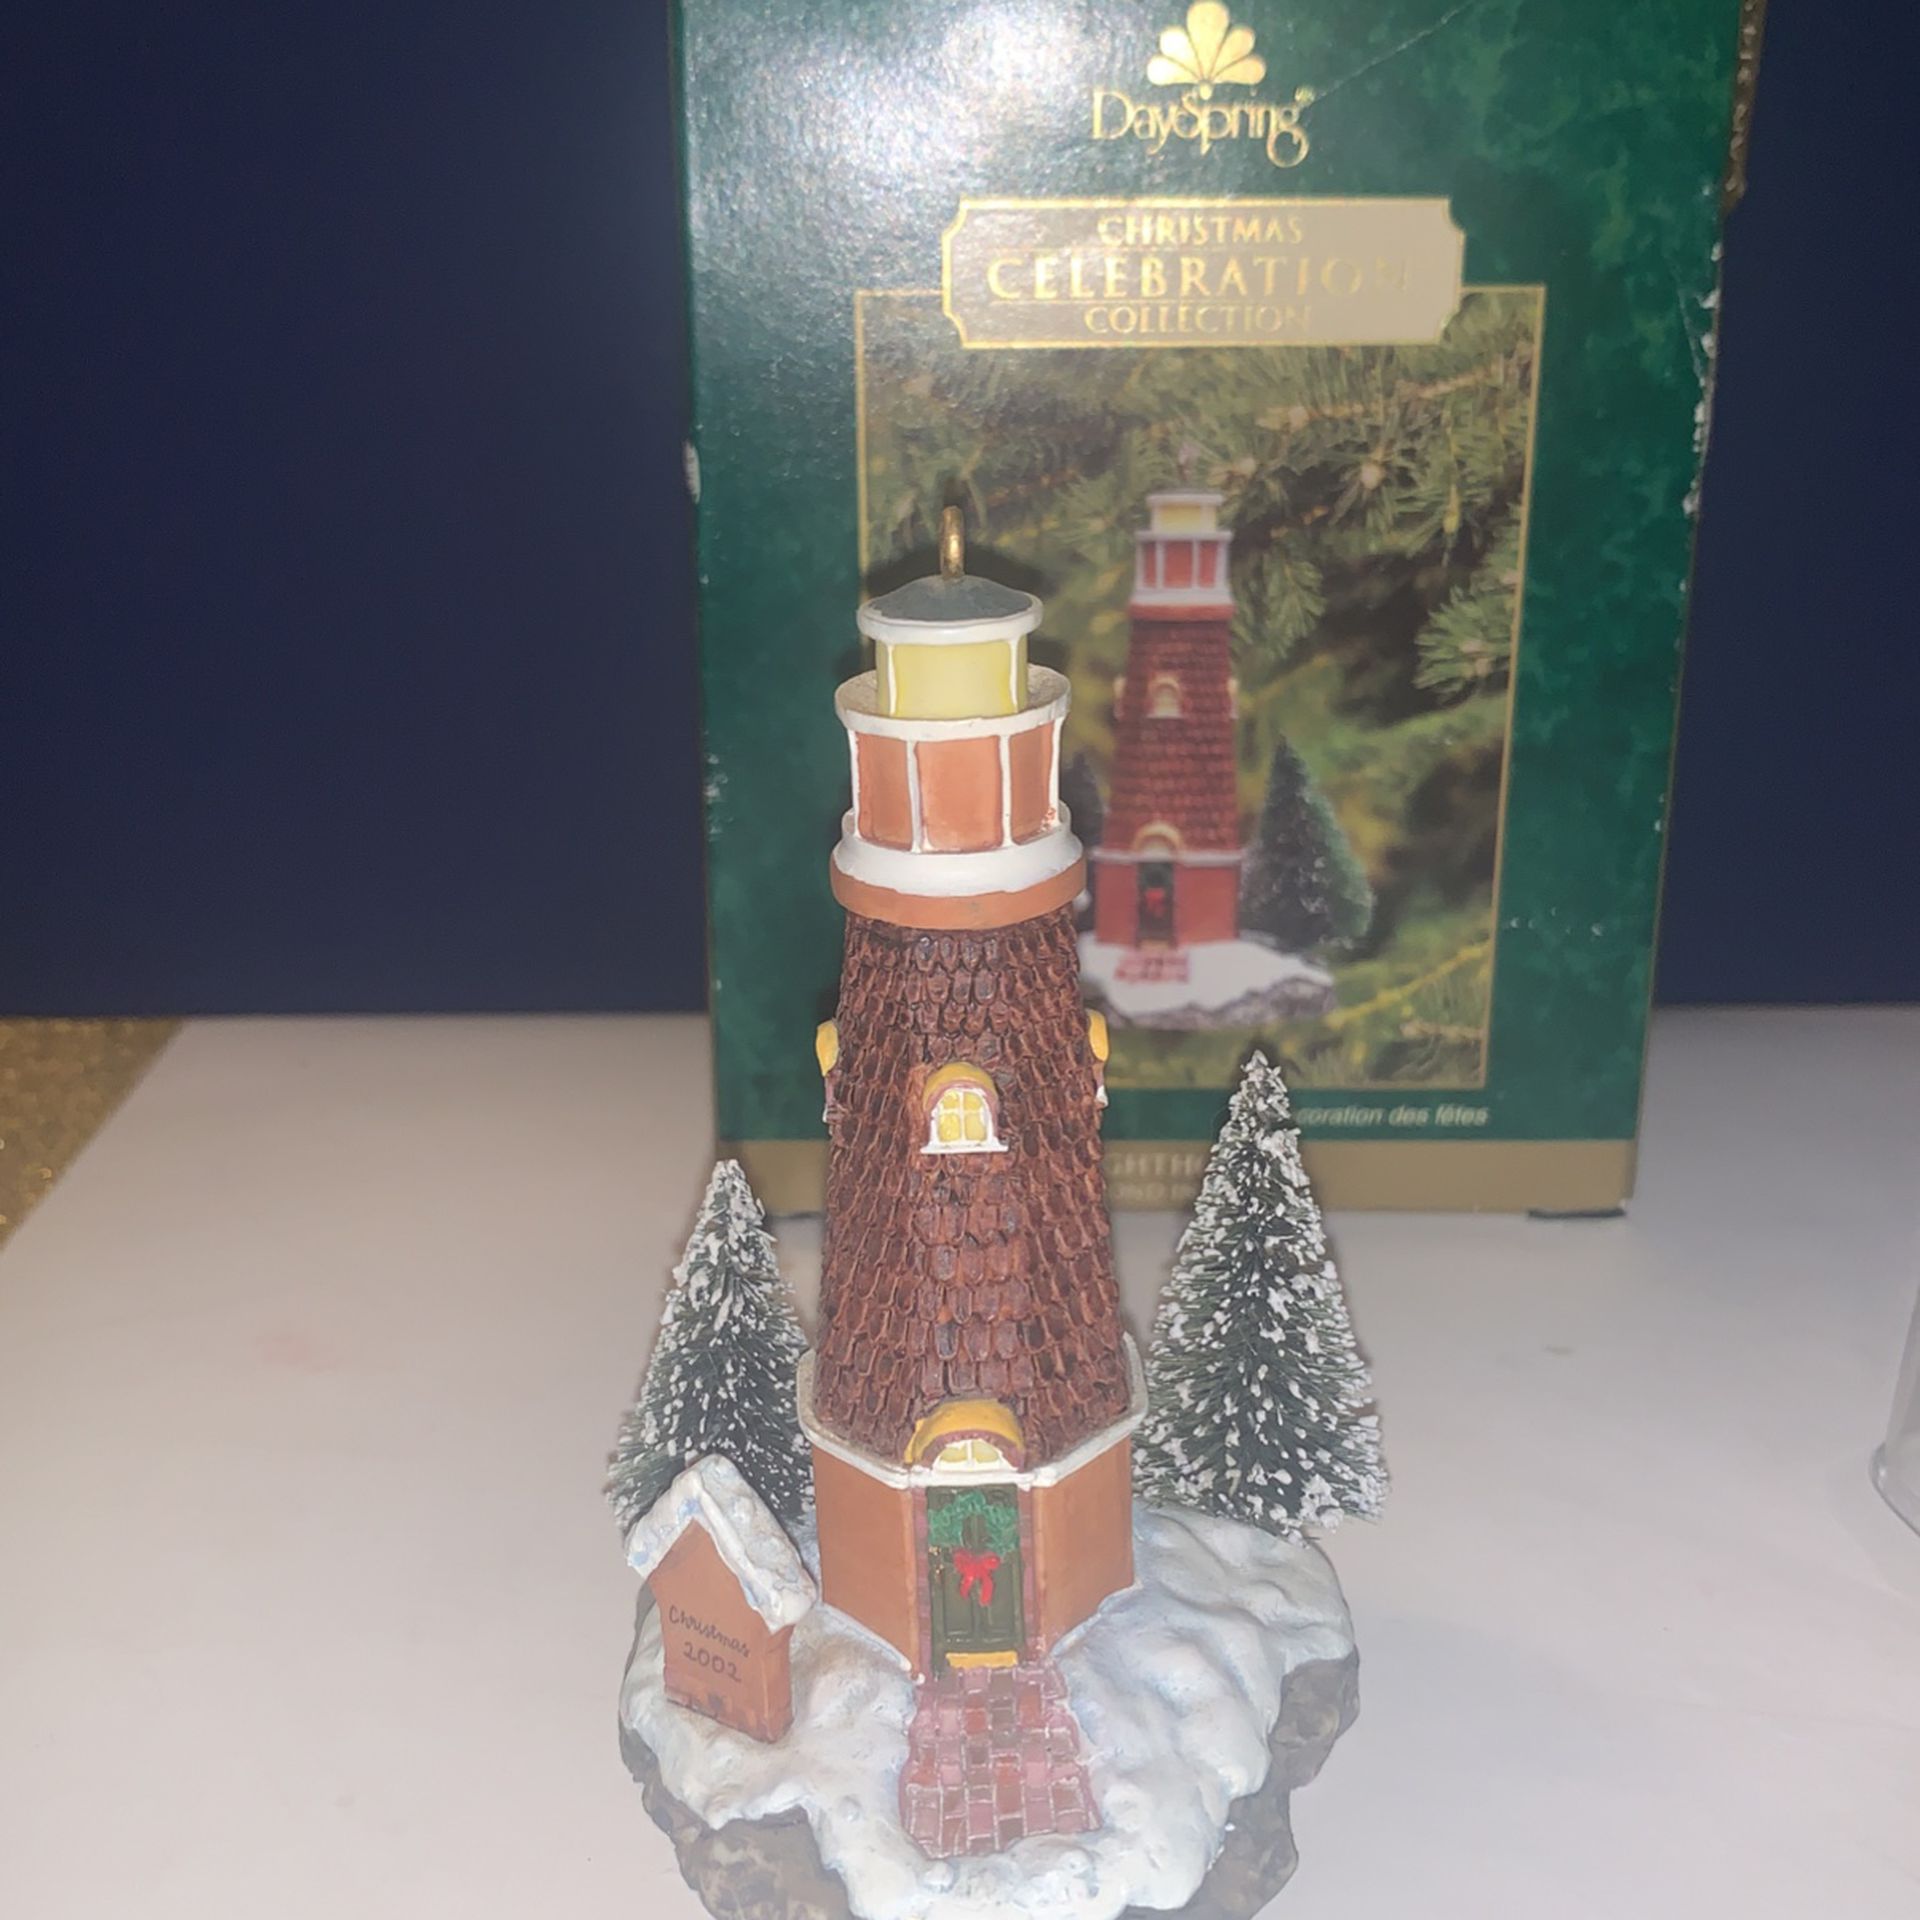 Dayspting Christmas Collection Lighthouse